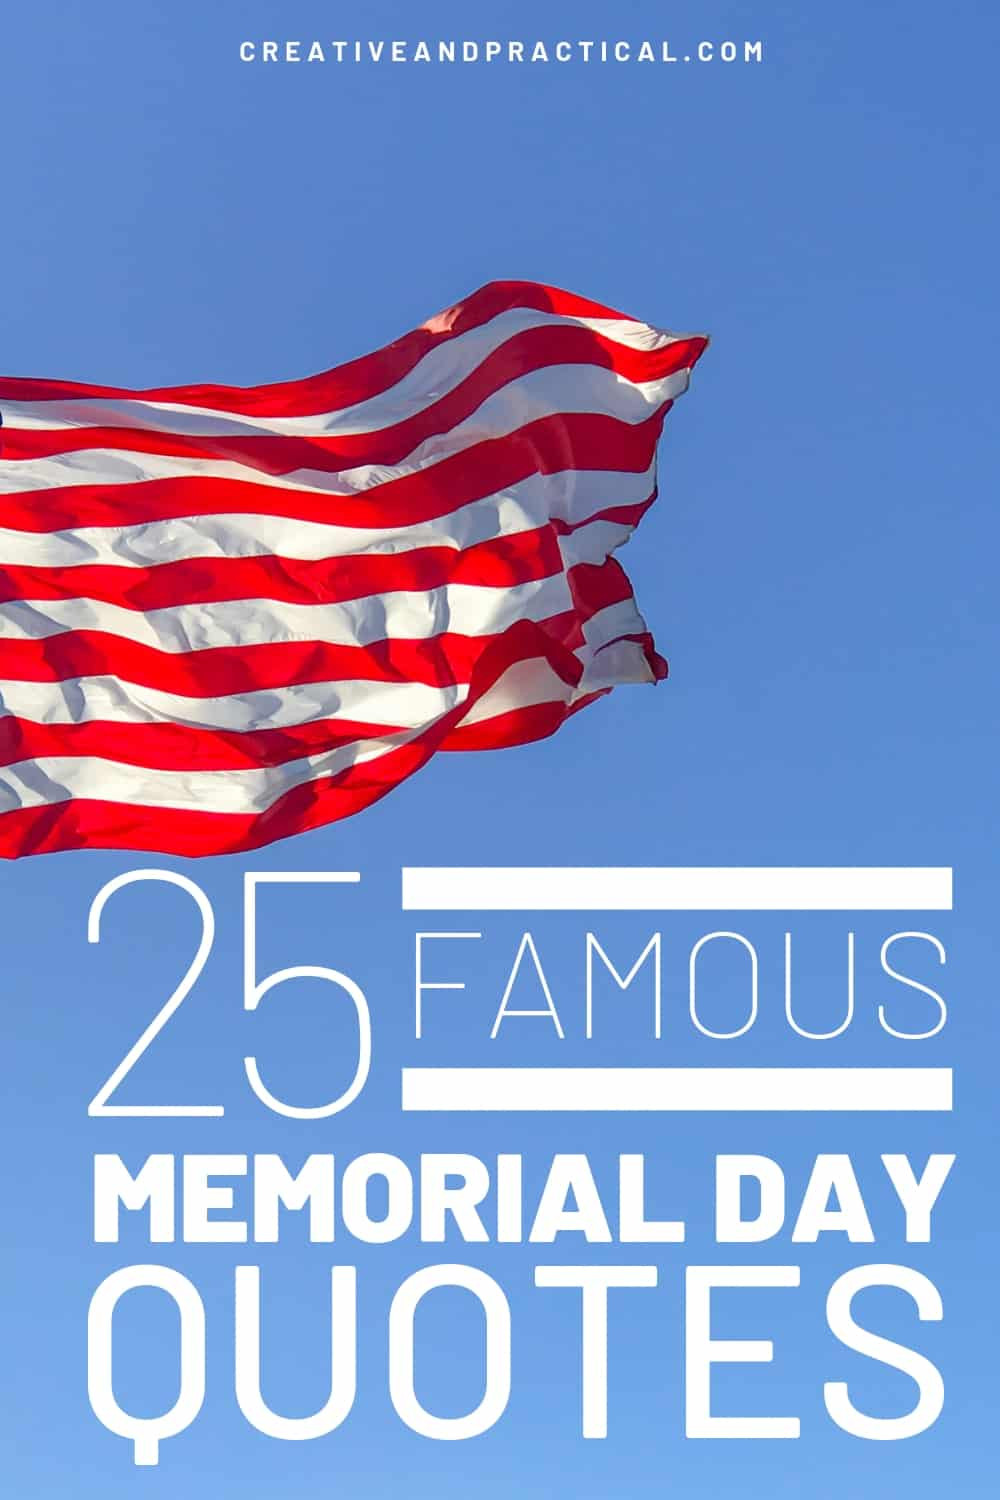 Inspirational Quotes For Memorial Day
 25 Inspirational Memorial Day Quotes 2019